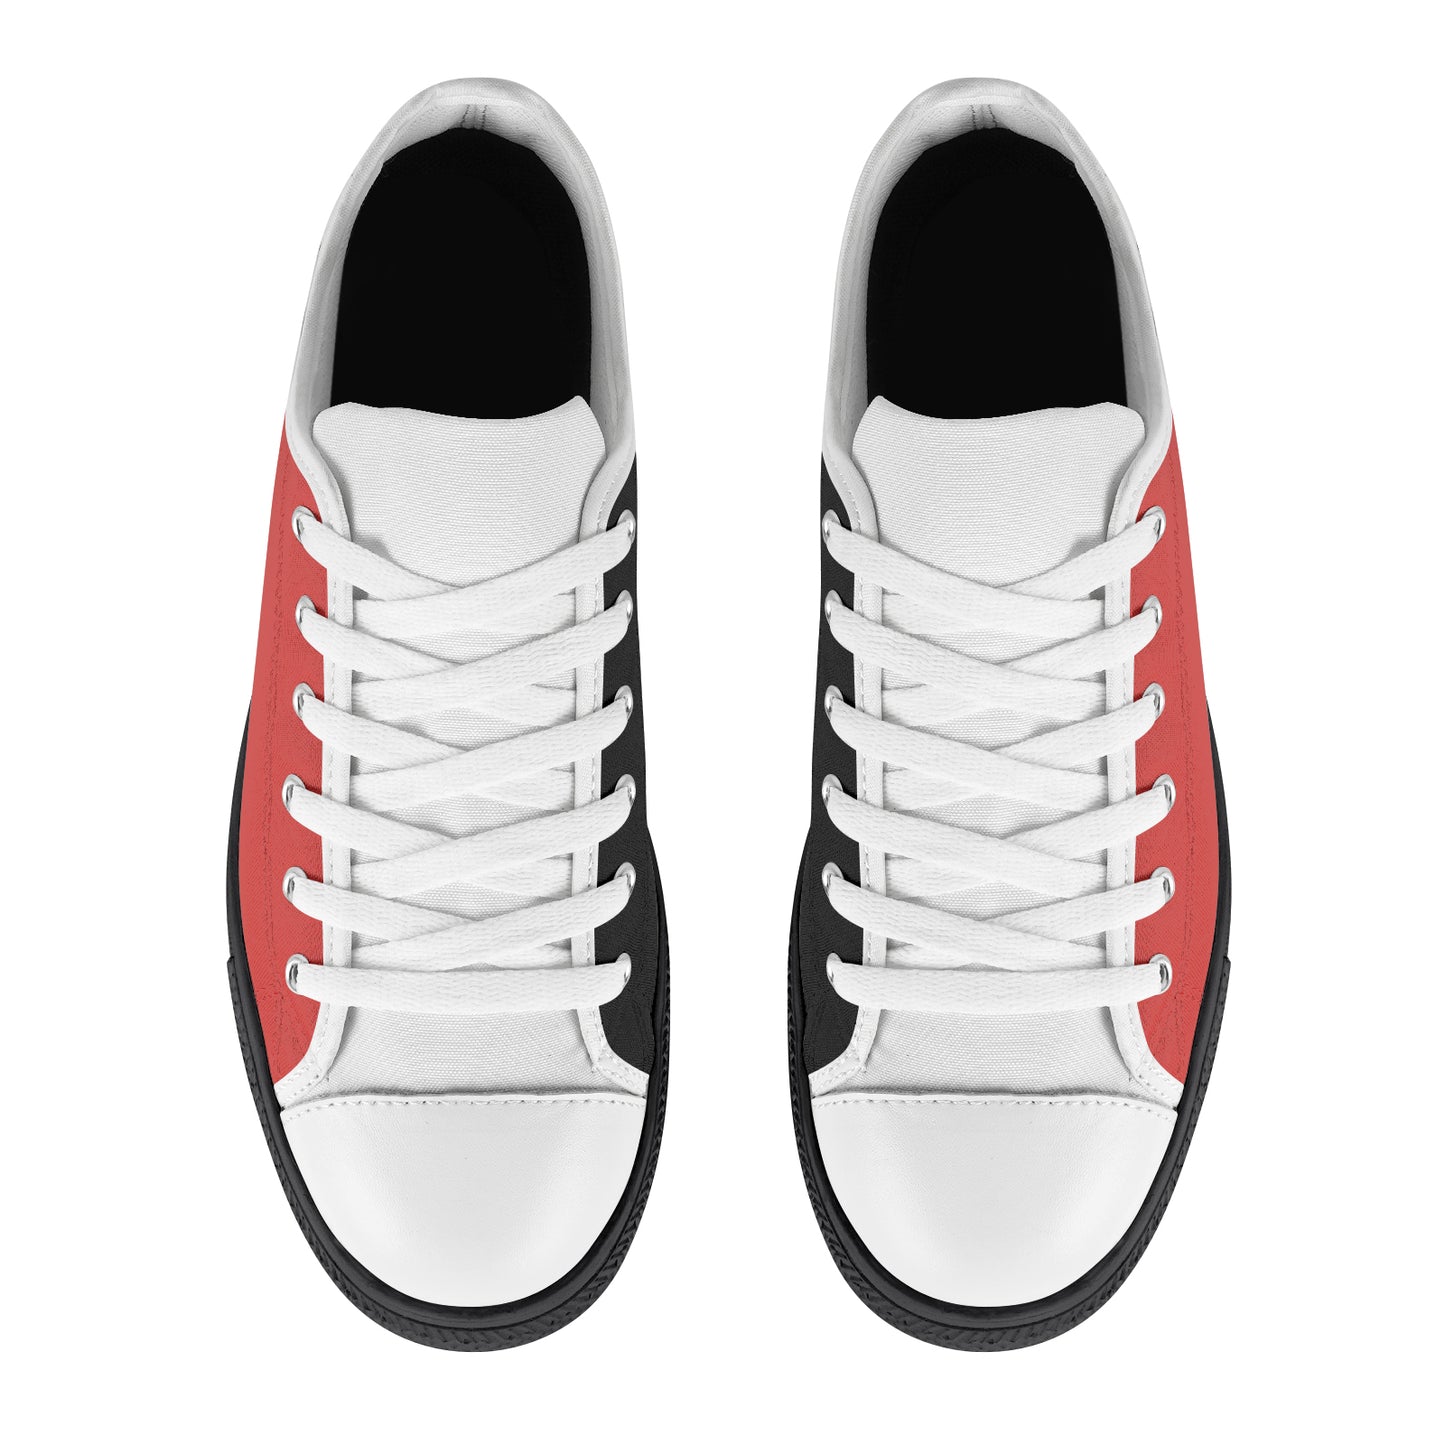 Men's Canvas Sneakers - Classic Red